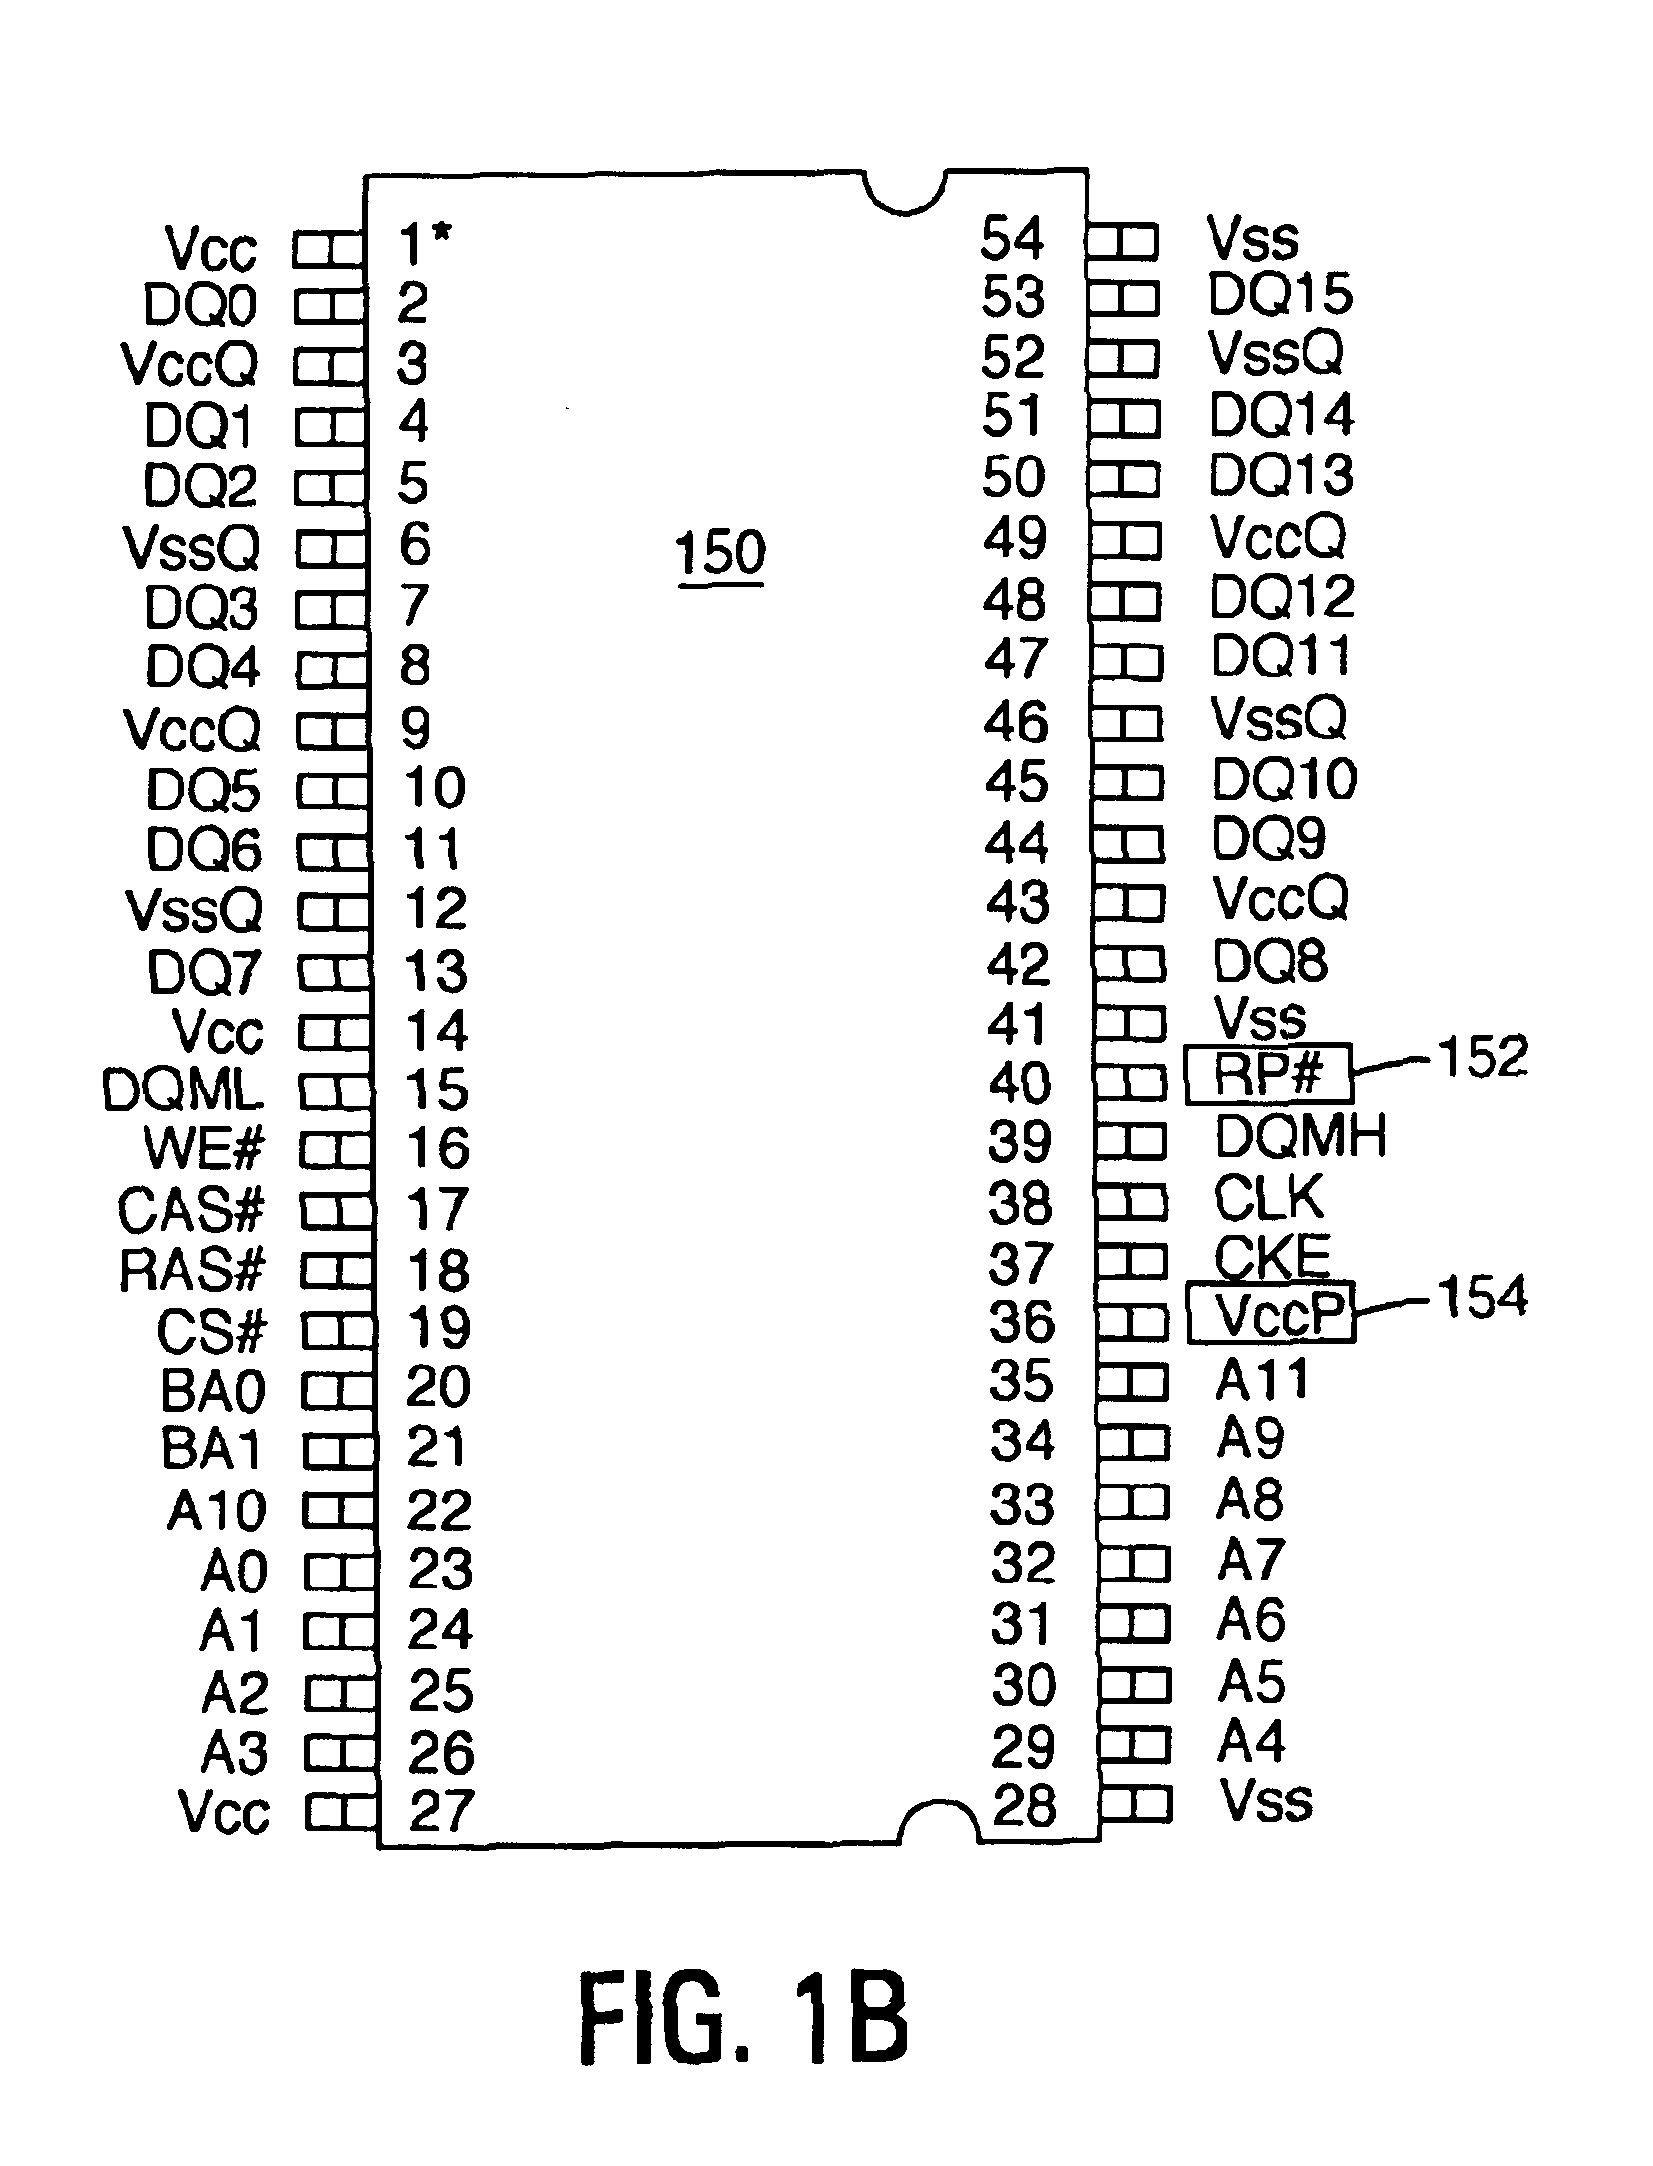 Synchronous flash memory emulating the pin configuration of SDRAM